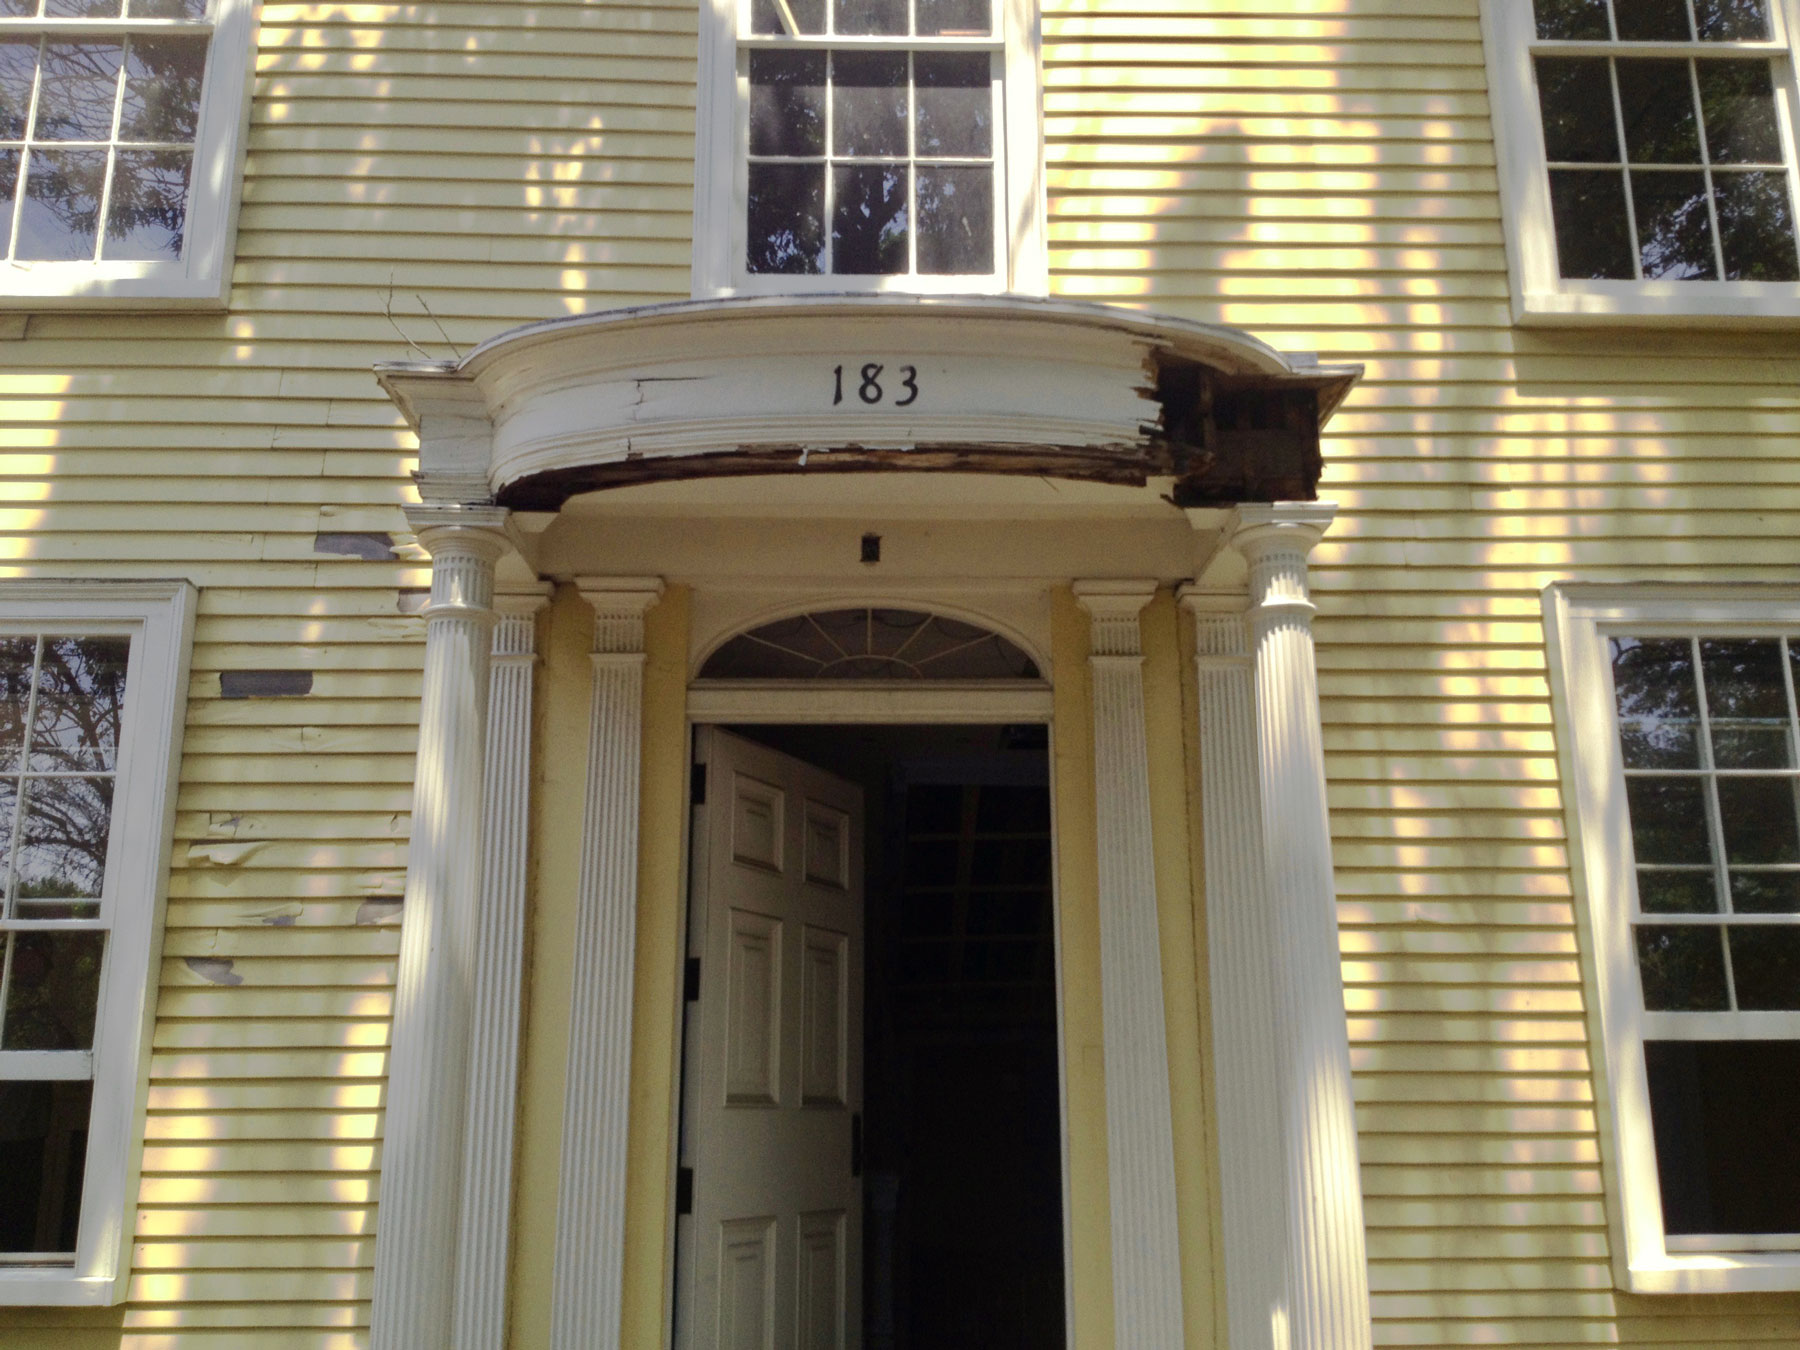 Dillaway Thomas House Doorway renovation 183 Roxbury Street, Roxbury Crossing, MA . Bonding with clients over historical finishes